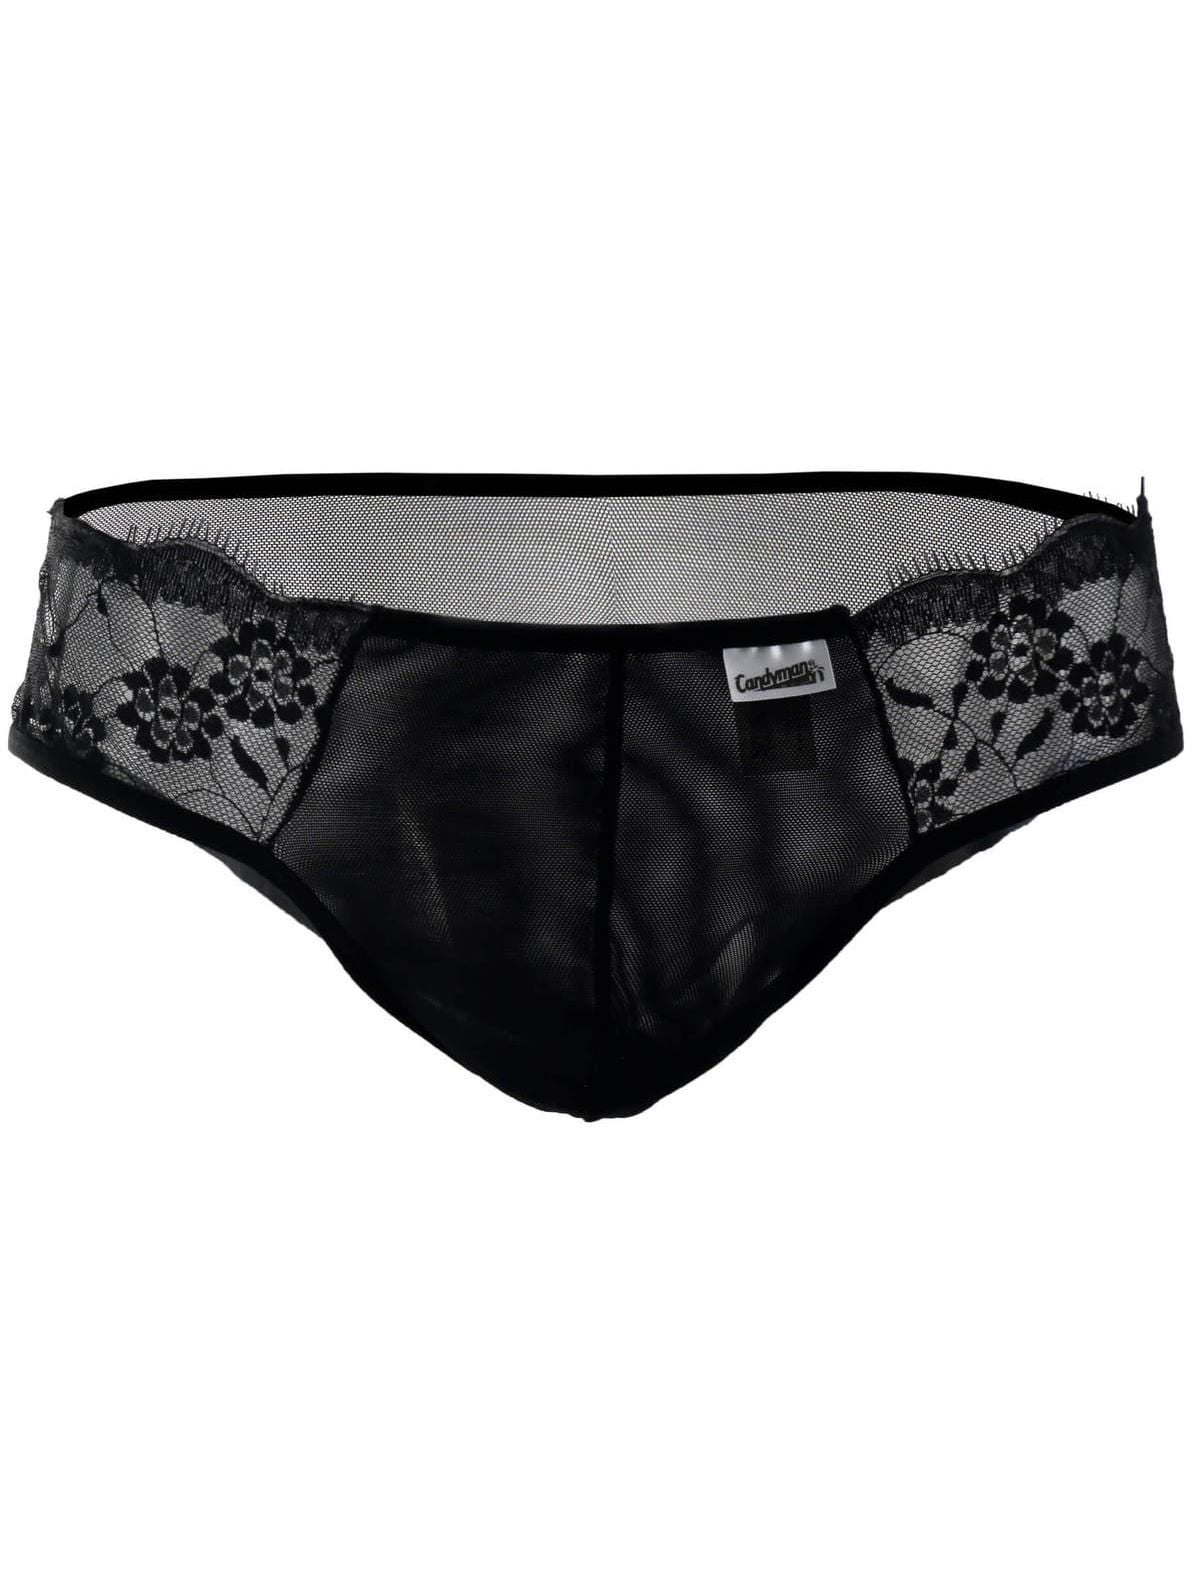 CandyMan 99195 Lace and sheer Briefs - Walmart.com